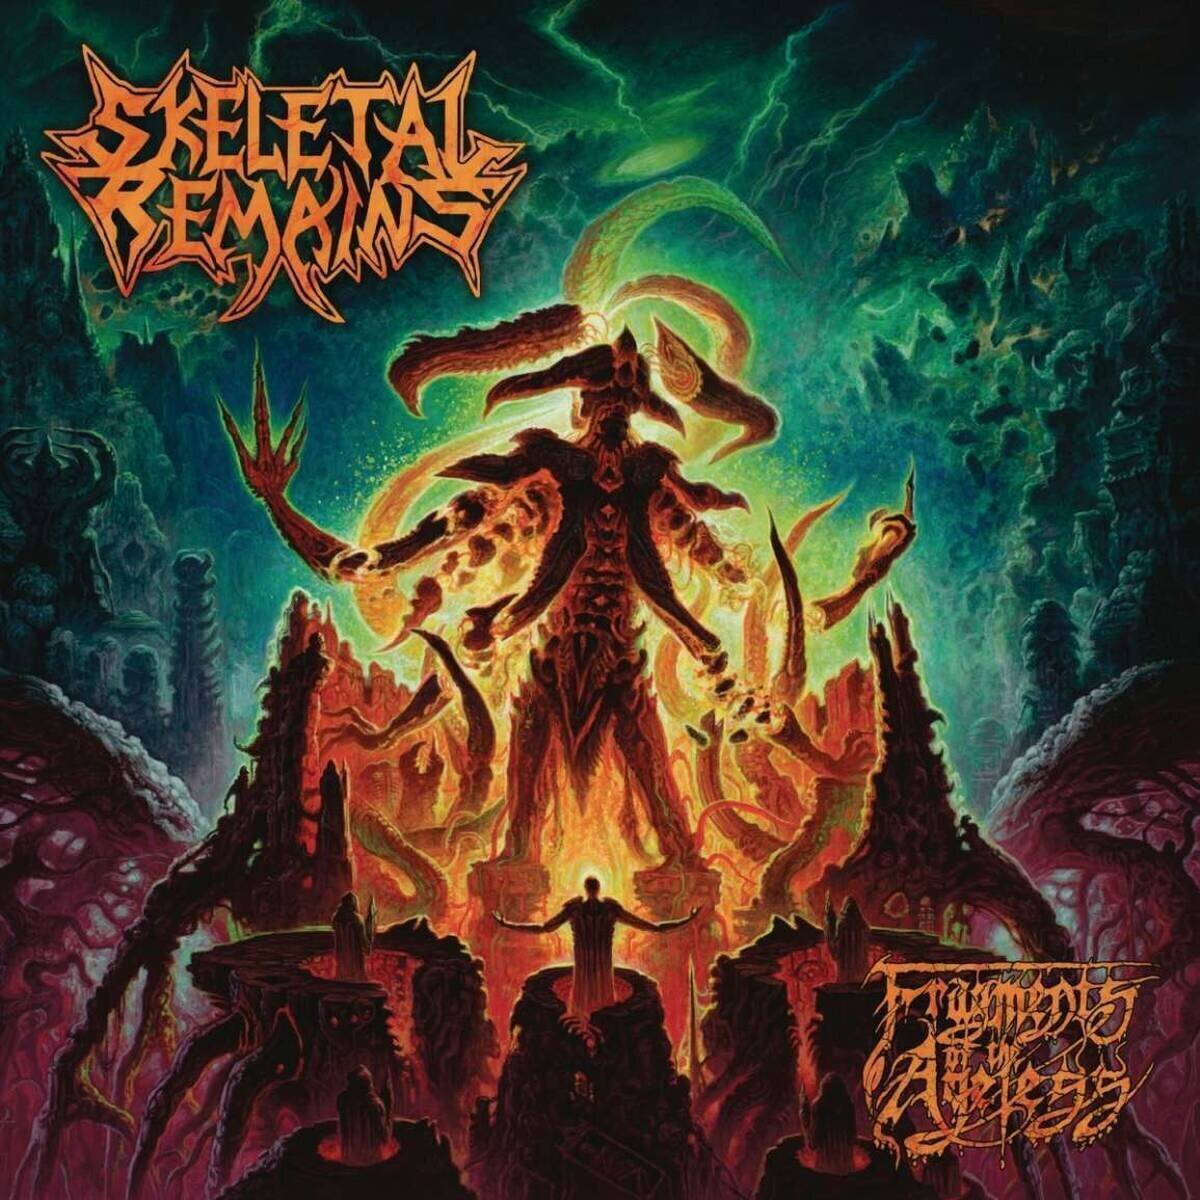 Muziek CD Skeletal Remains - Fragments Of The Ageless (Limited Edition) (CD)